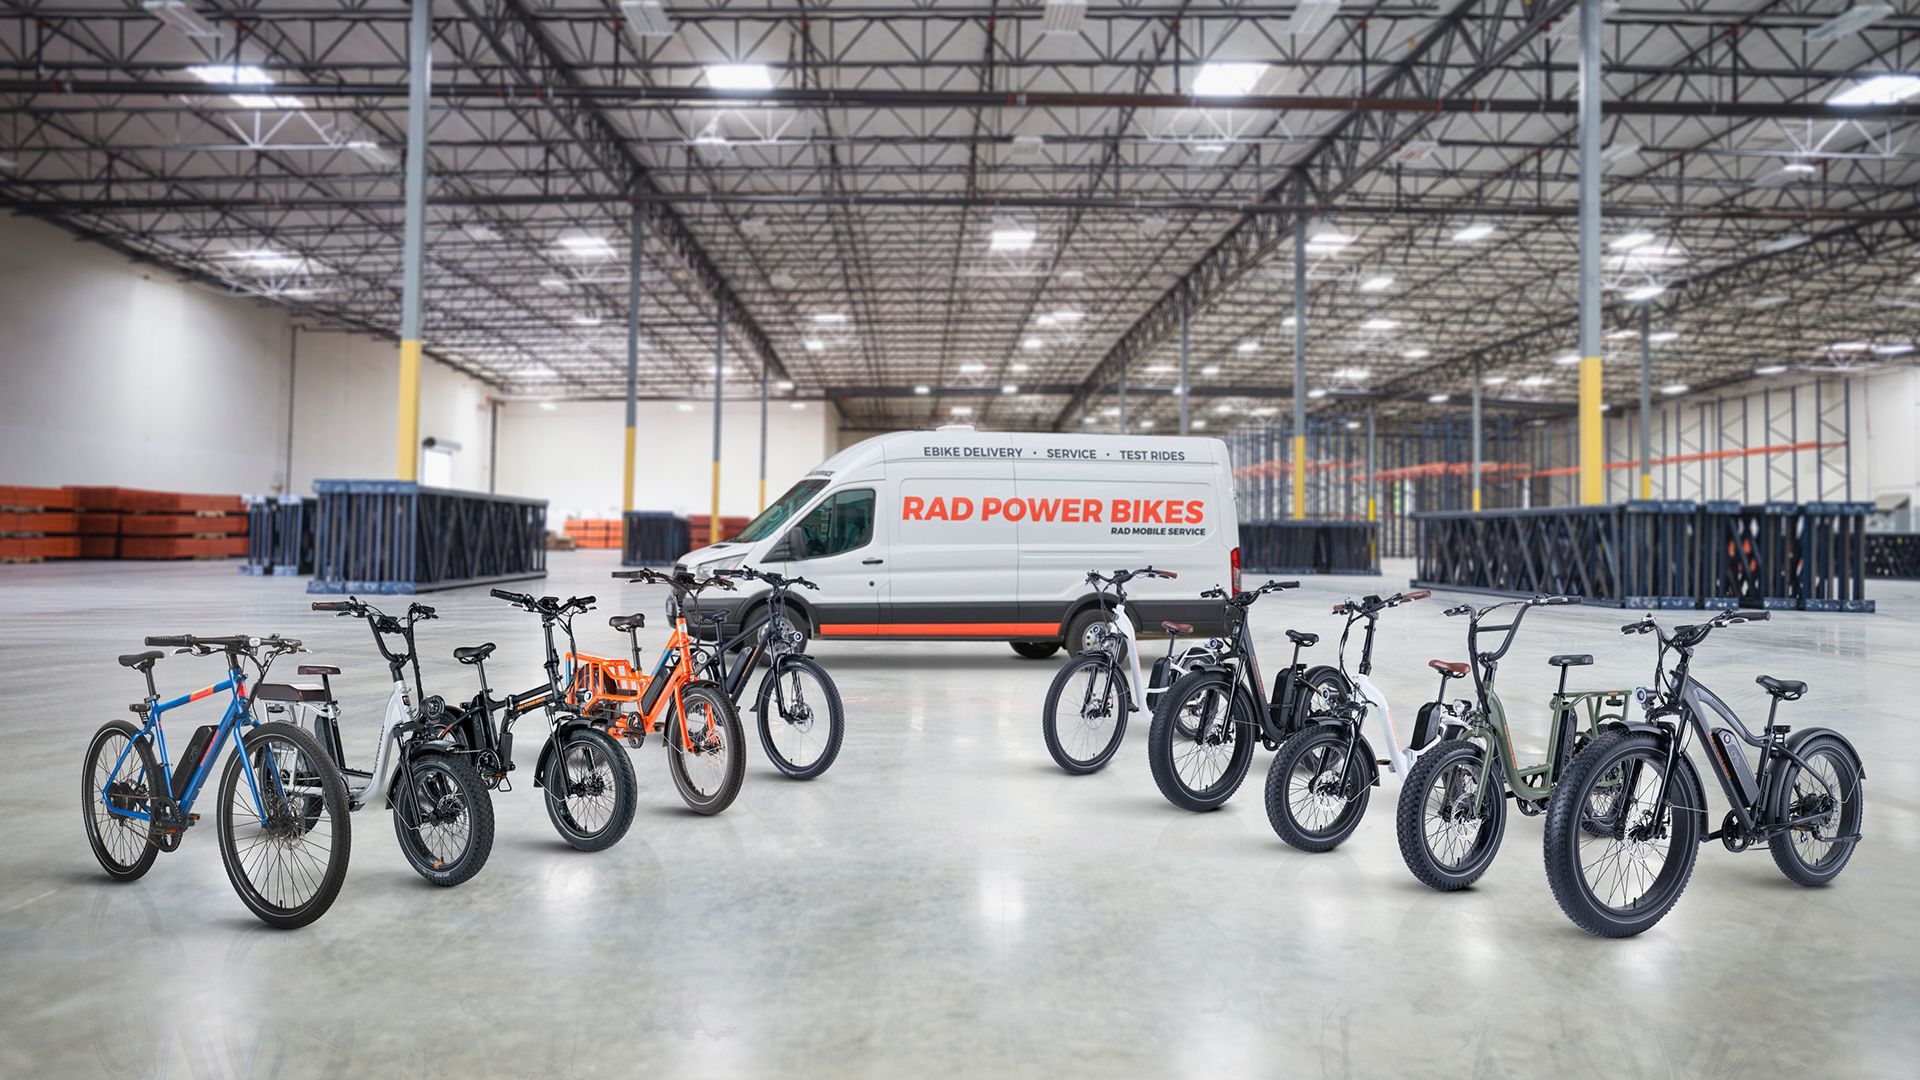 Photo of different models from the electric bike company Rad Power Bikes.